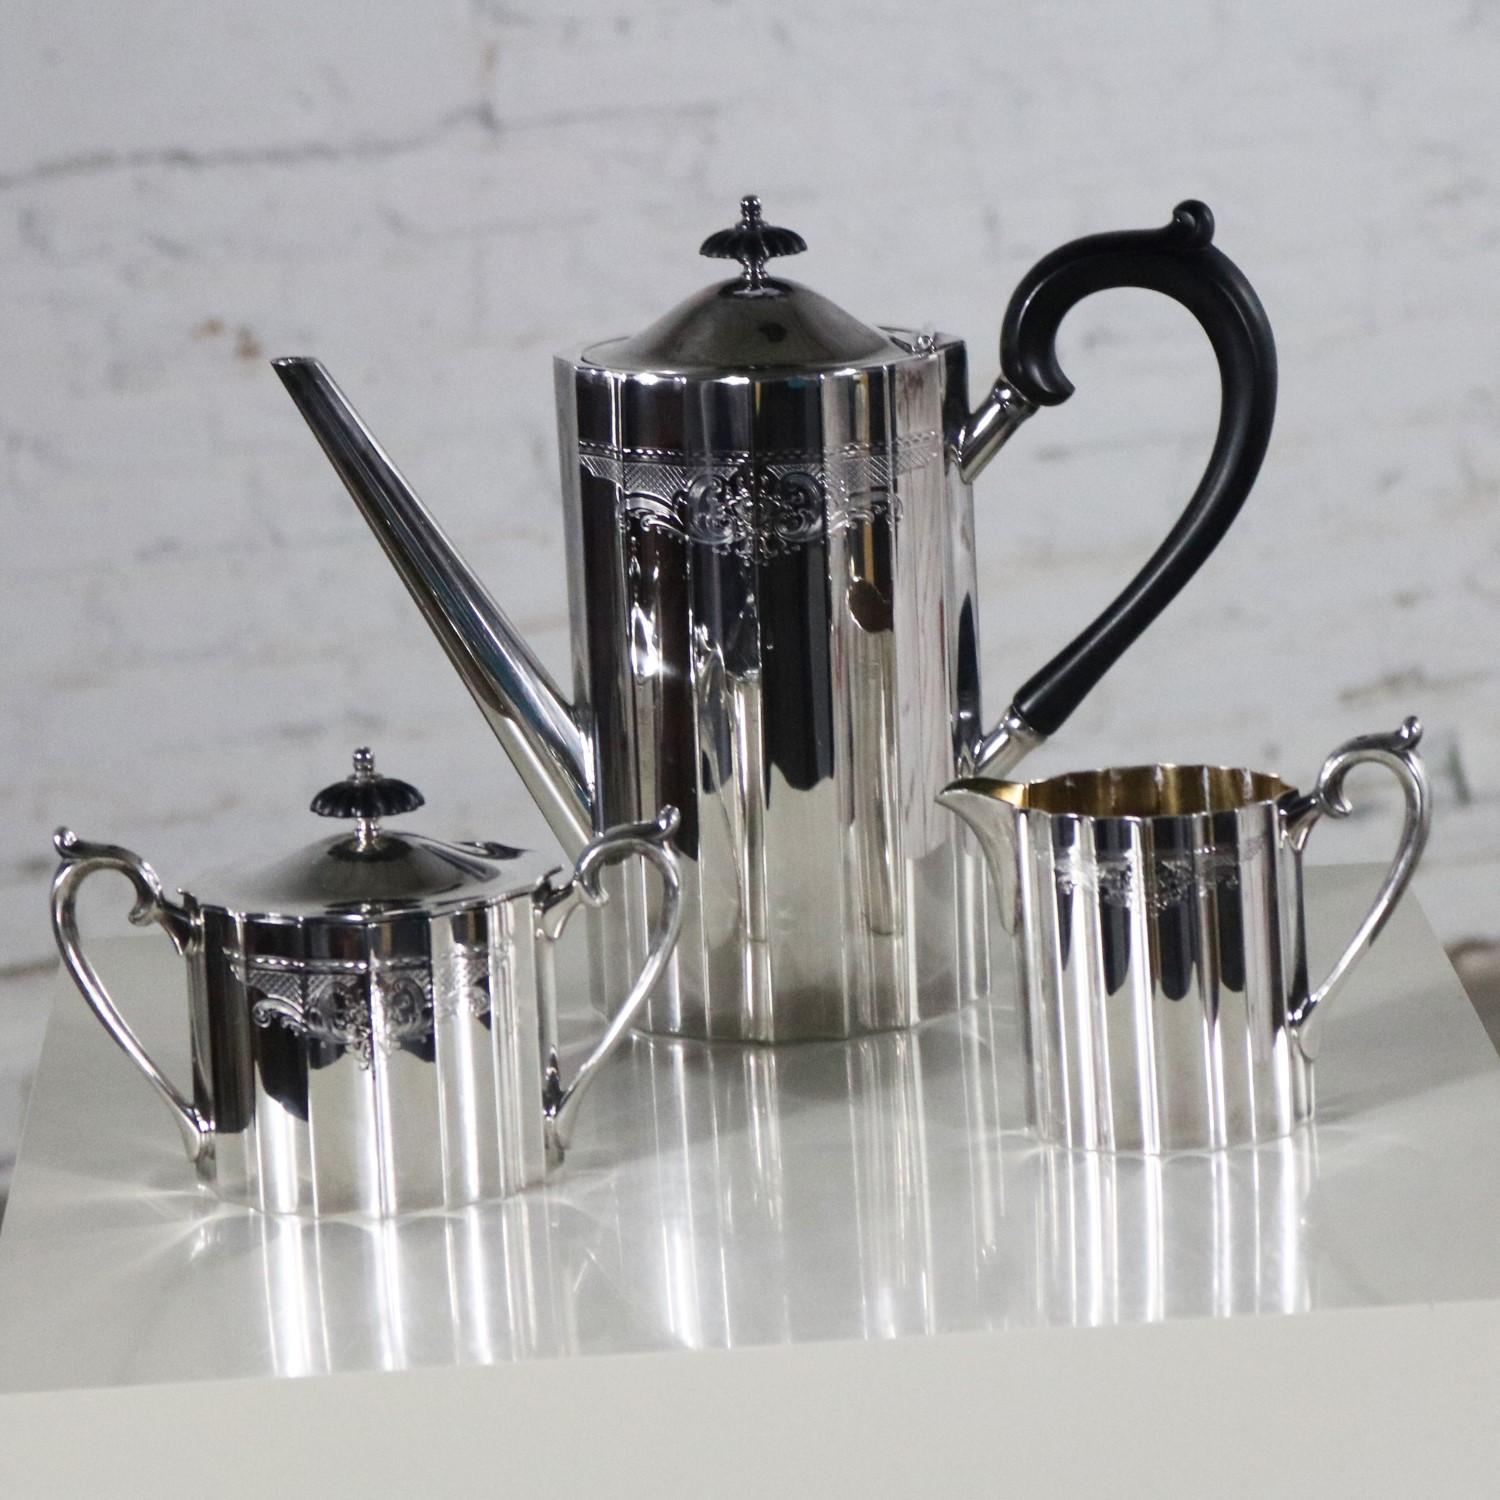 Handsome Colonial Classic silver plate coffee service made by Lunt Silver. This three-piece set includes the coffee pot, creamer, and sugar bowl. It is in fabulous vintage condition, circa 1960s.

Breakfast in bed anyone!!? Serve your morning